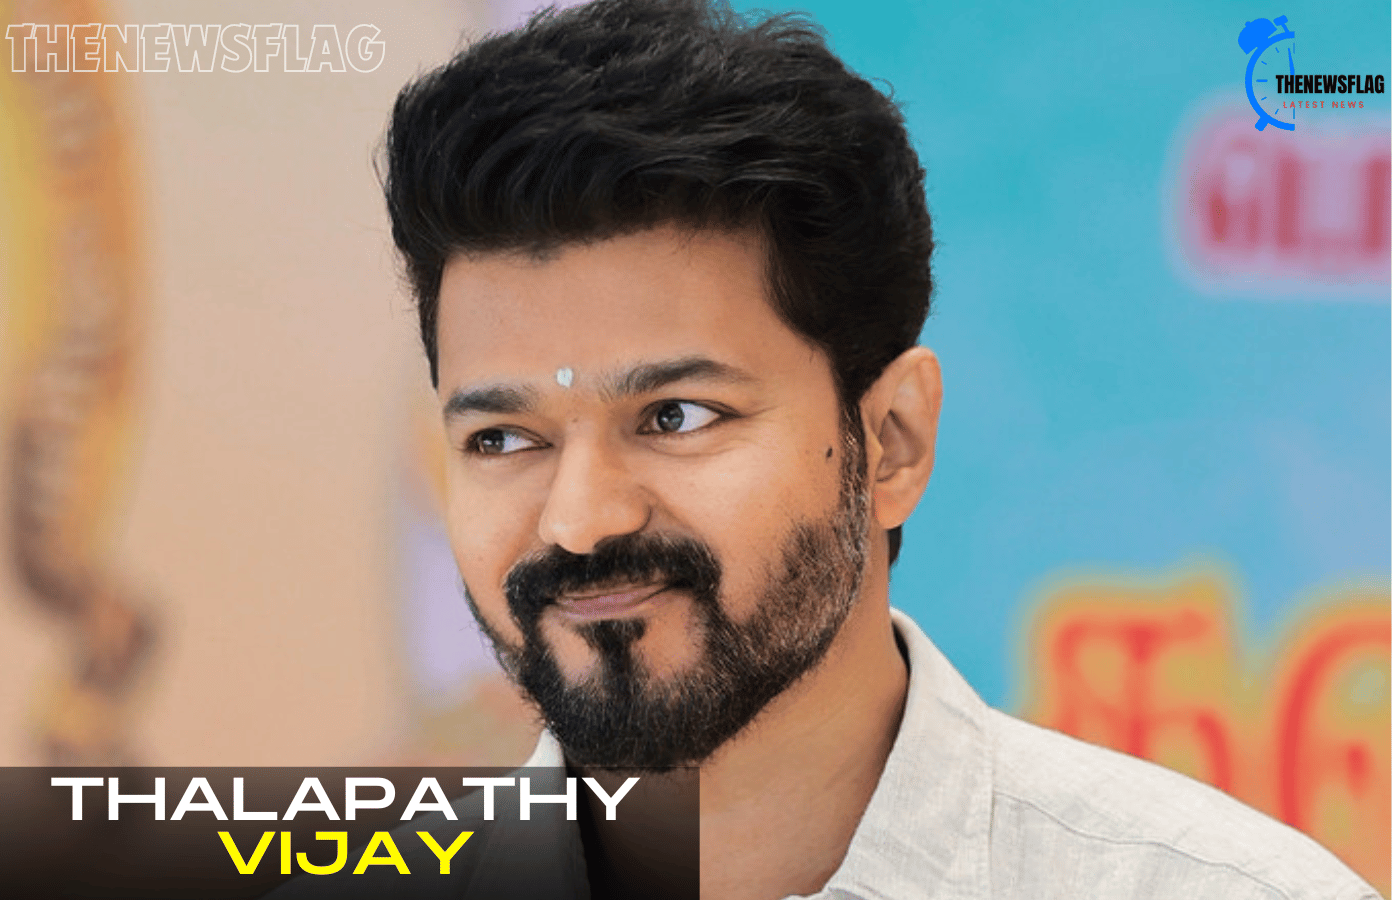 Thalapathy Vijay was severely harmed by supporters from Kerala, breaking his fancy car and causing unexpected videos.